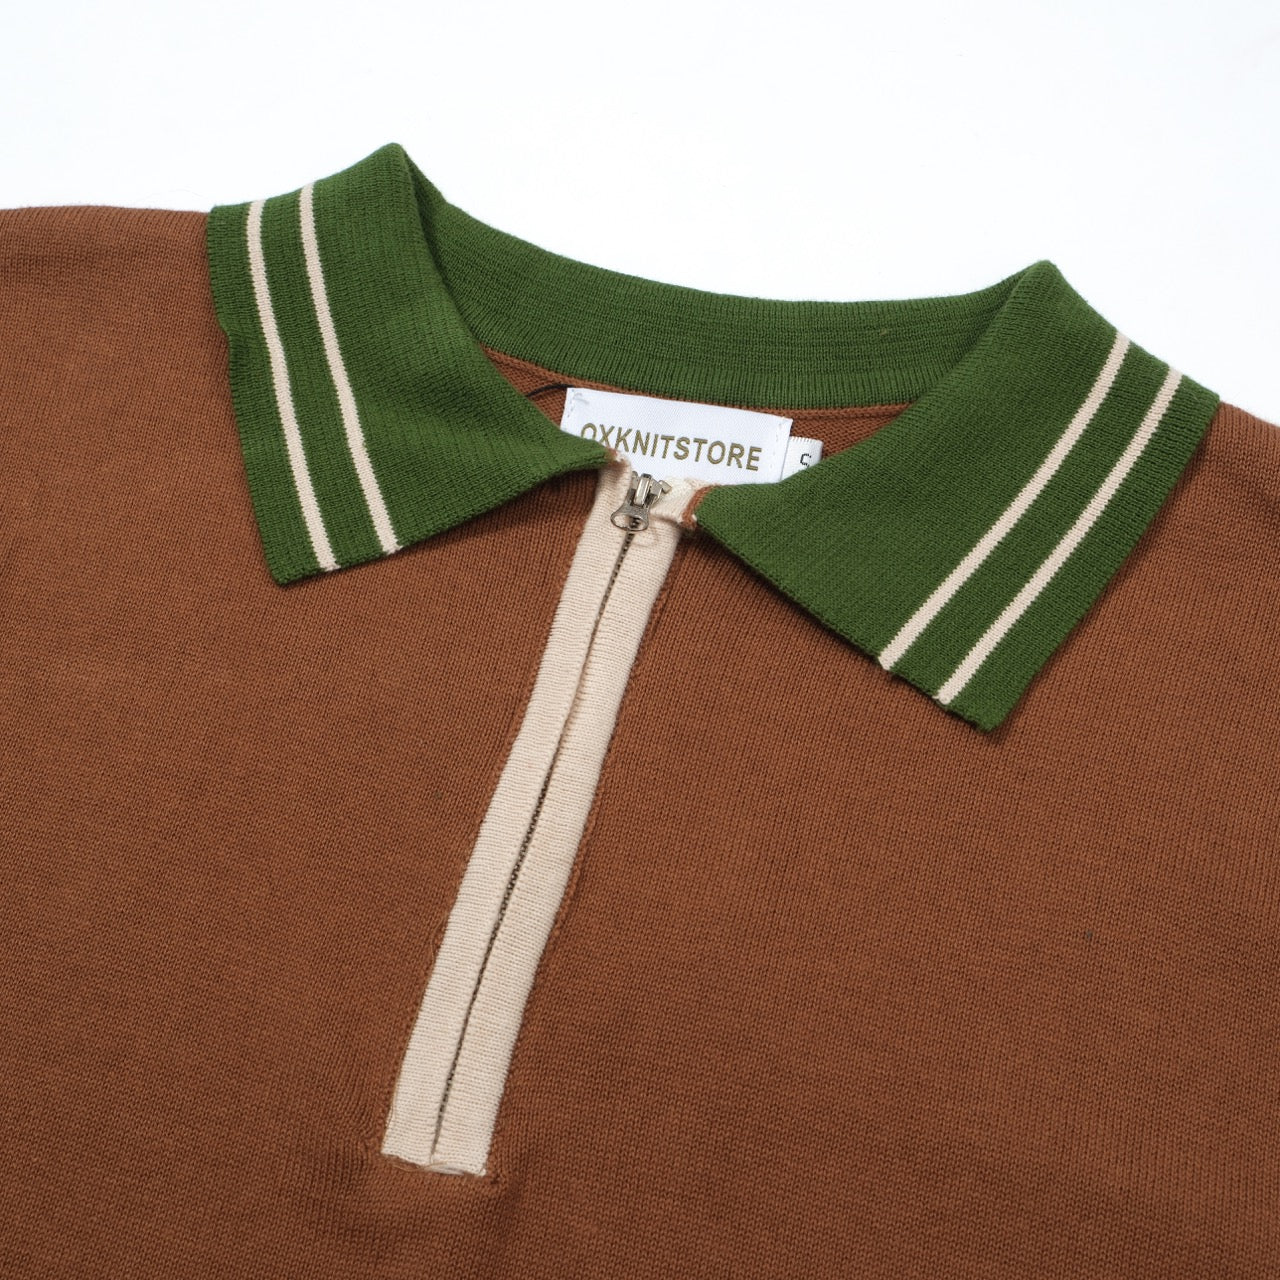 OXKNIT Men Vintage Clothing 1960s Mod Style Casual Style Brown Knit Retro Polo